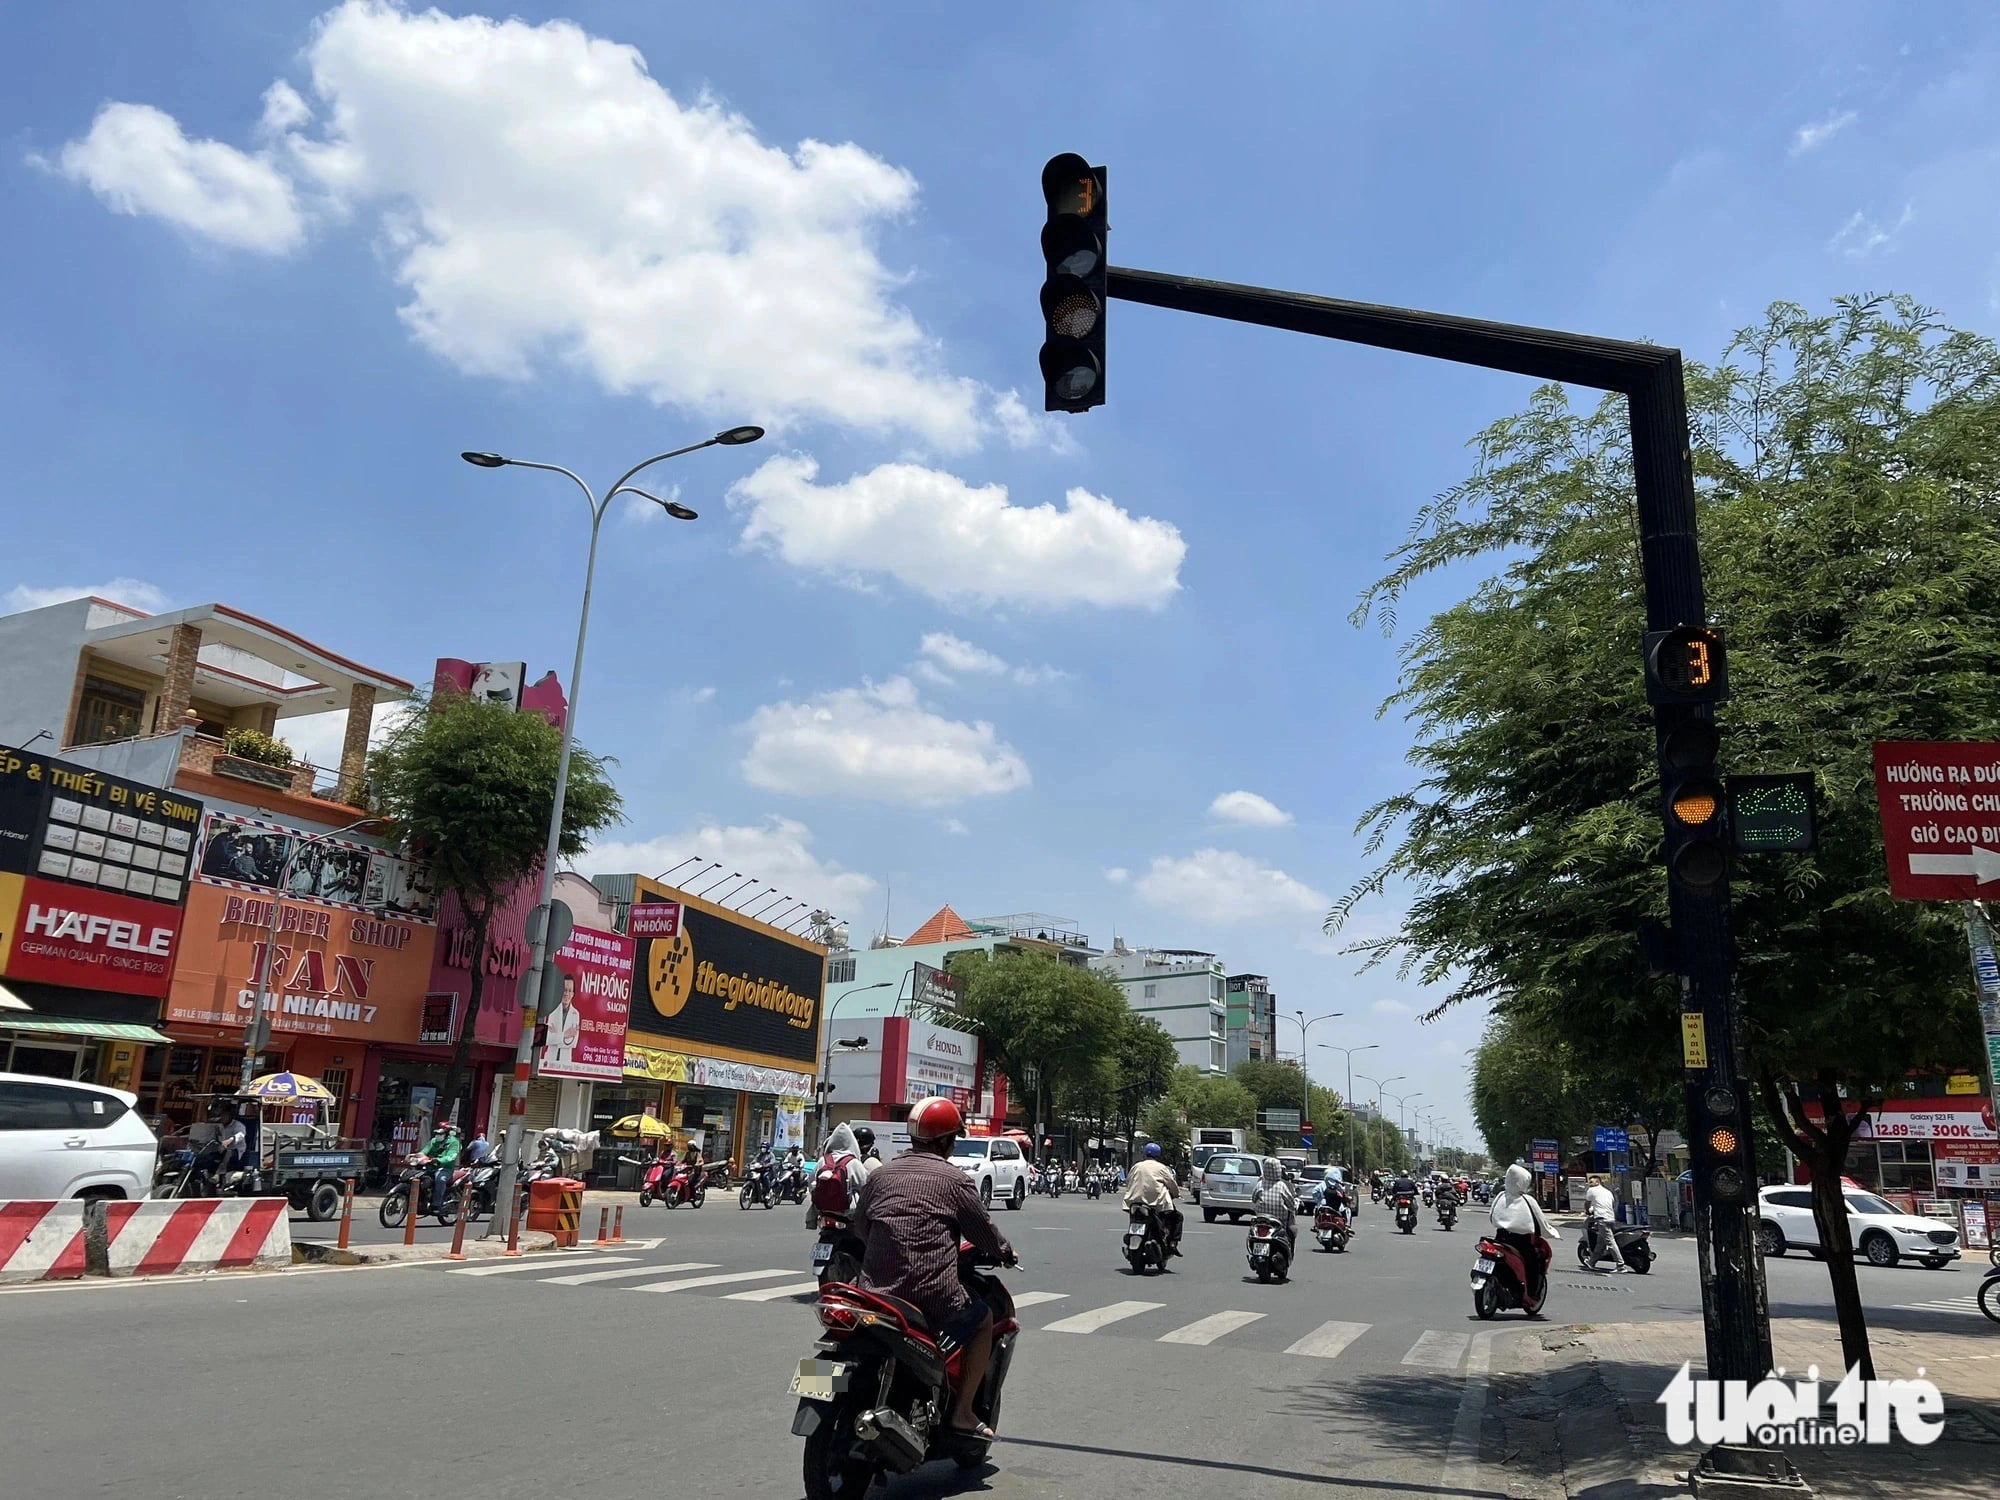 Noise pollution: Vietnamese use vehicle horns excessively